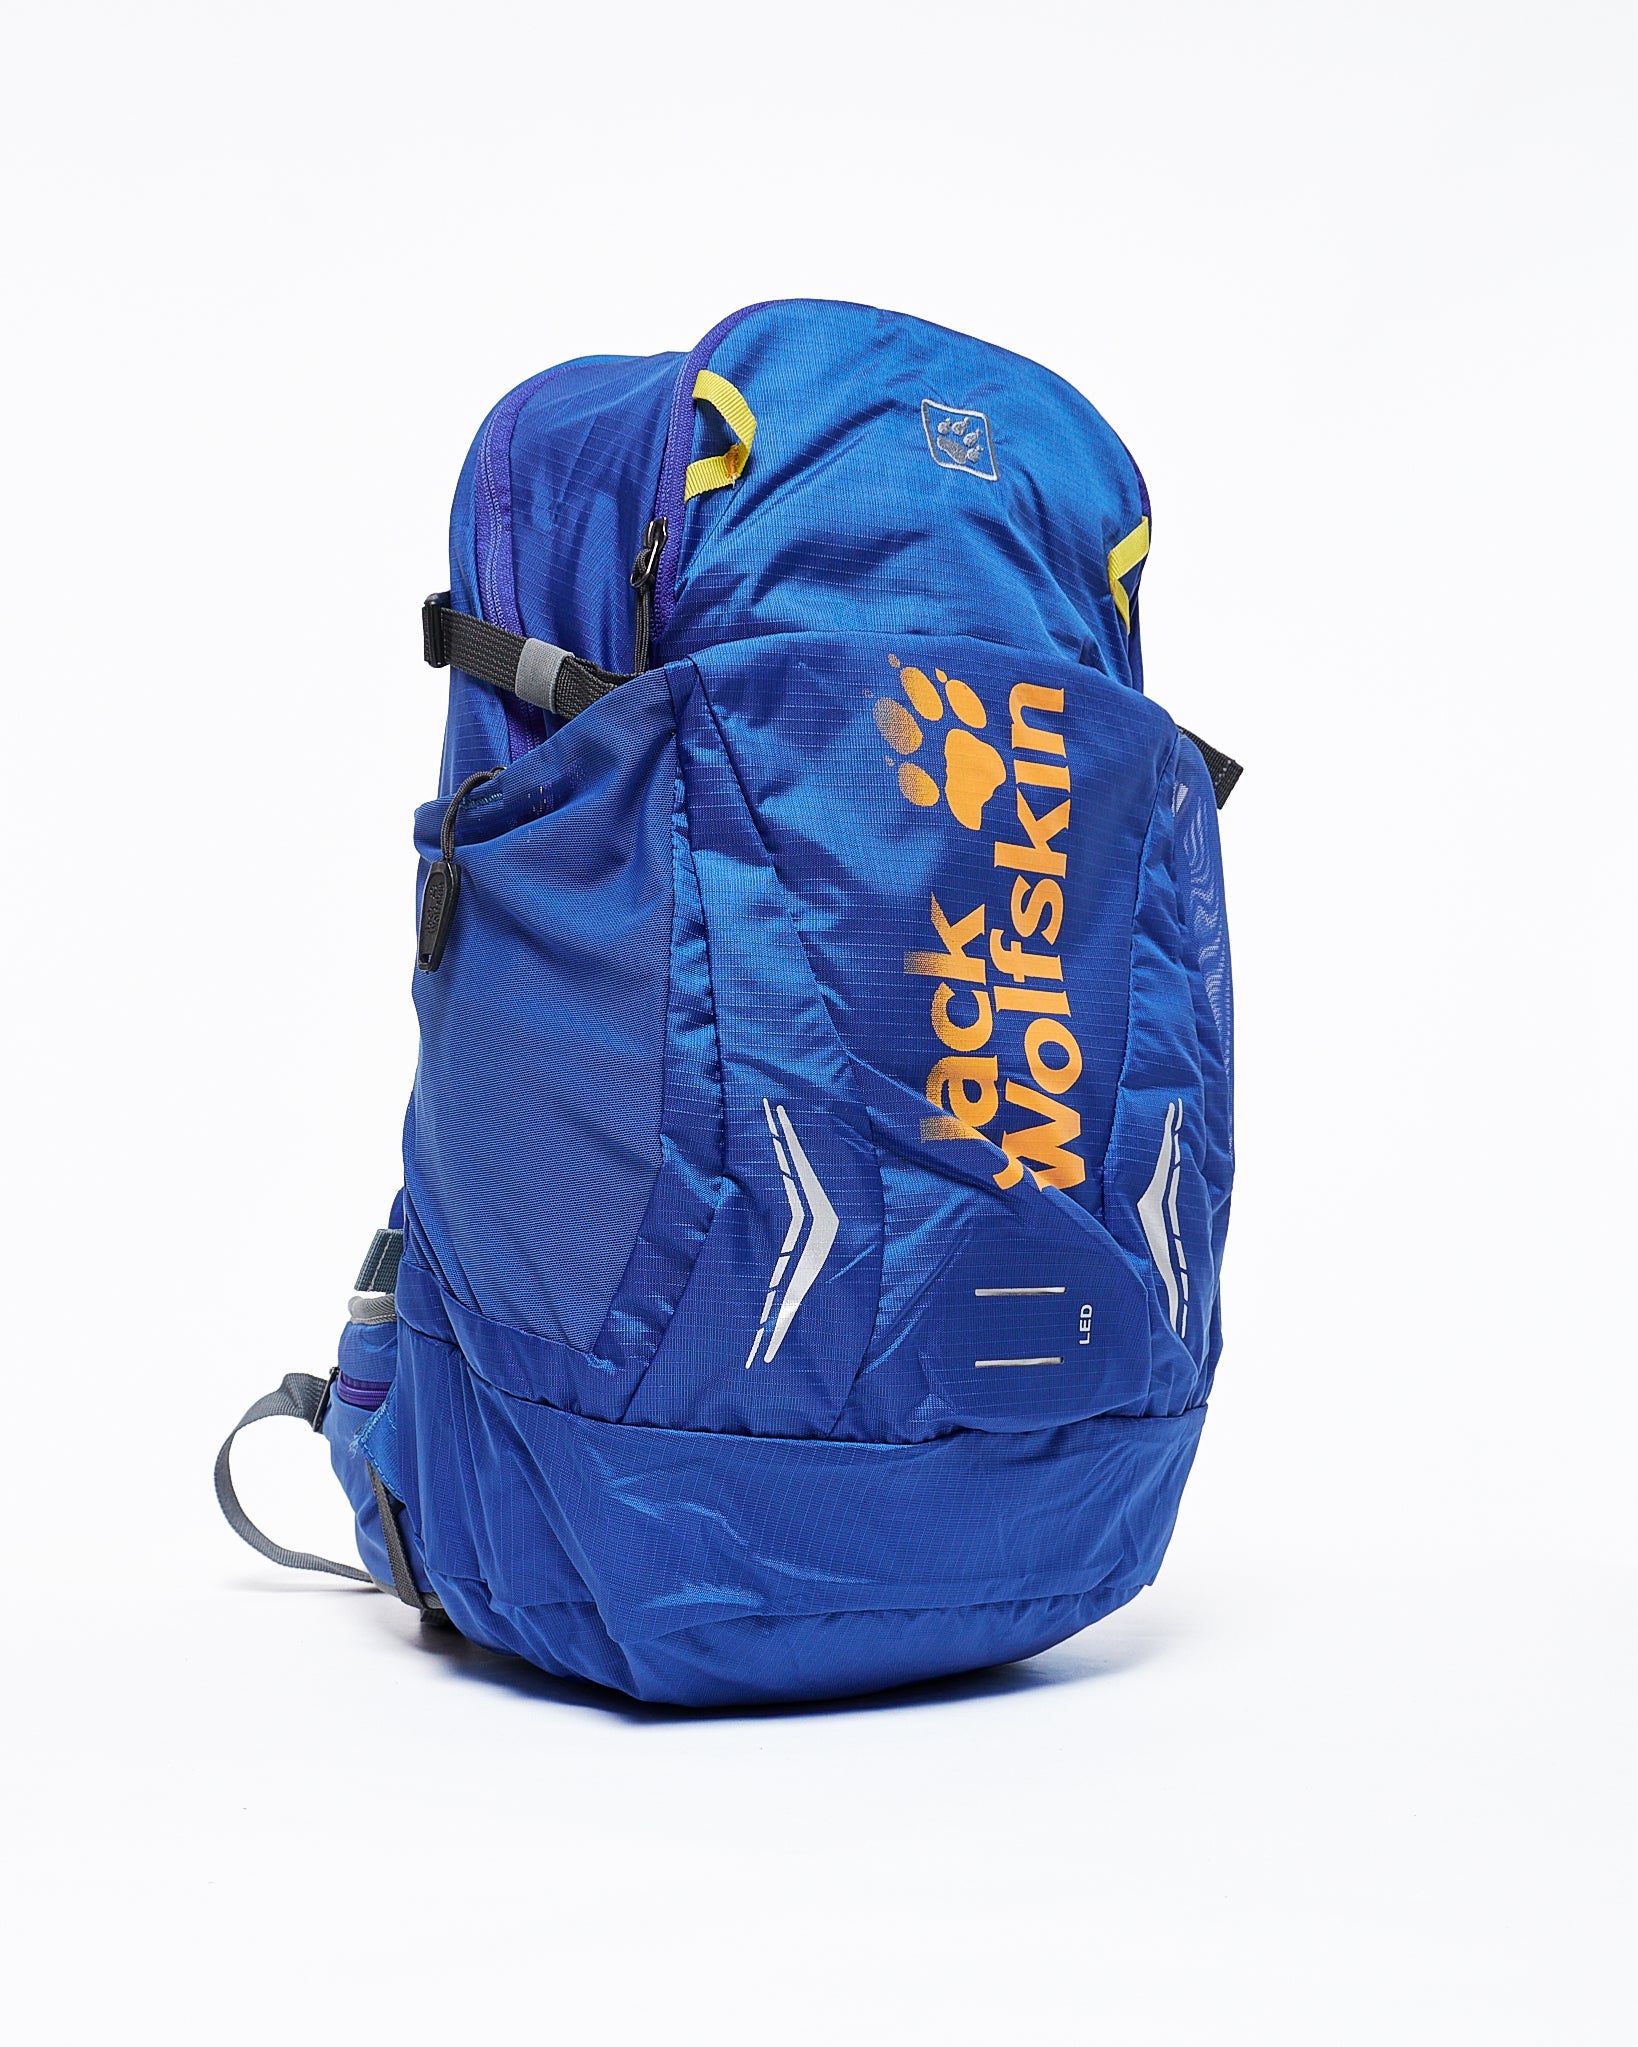 MOI OUTFIT-Hiking Backpack 45.90